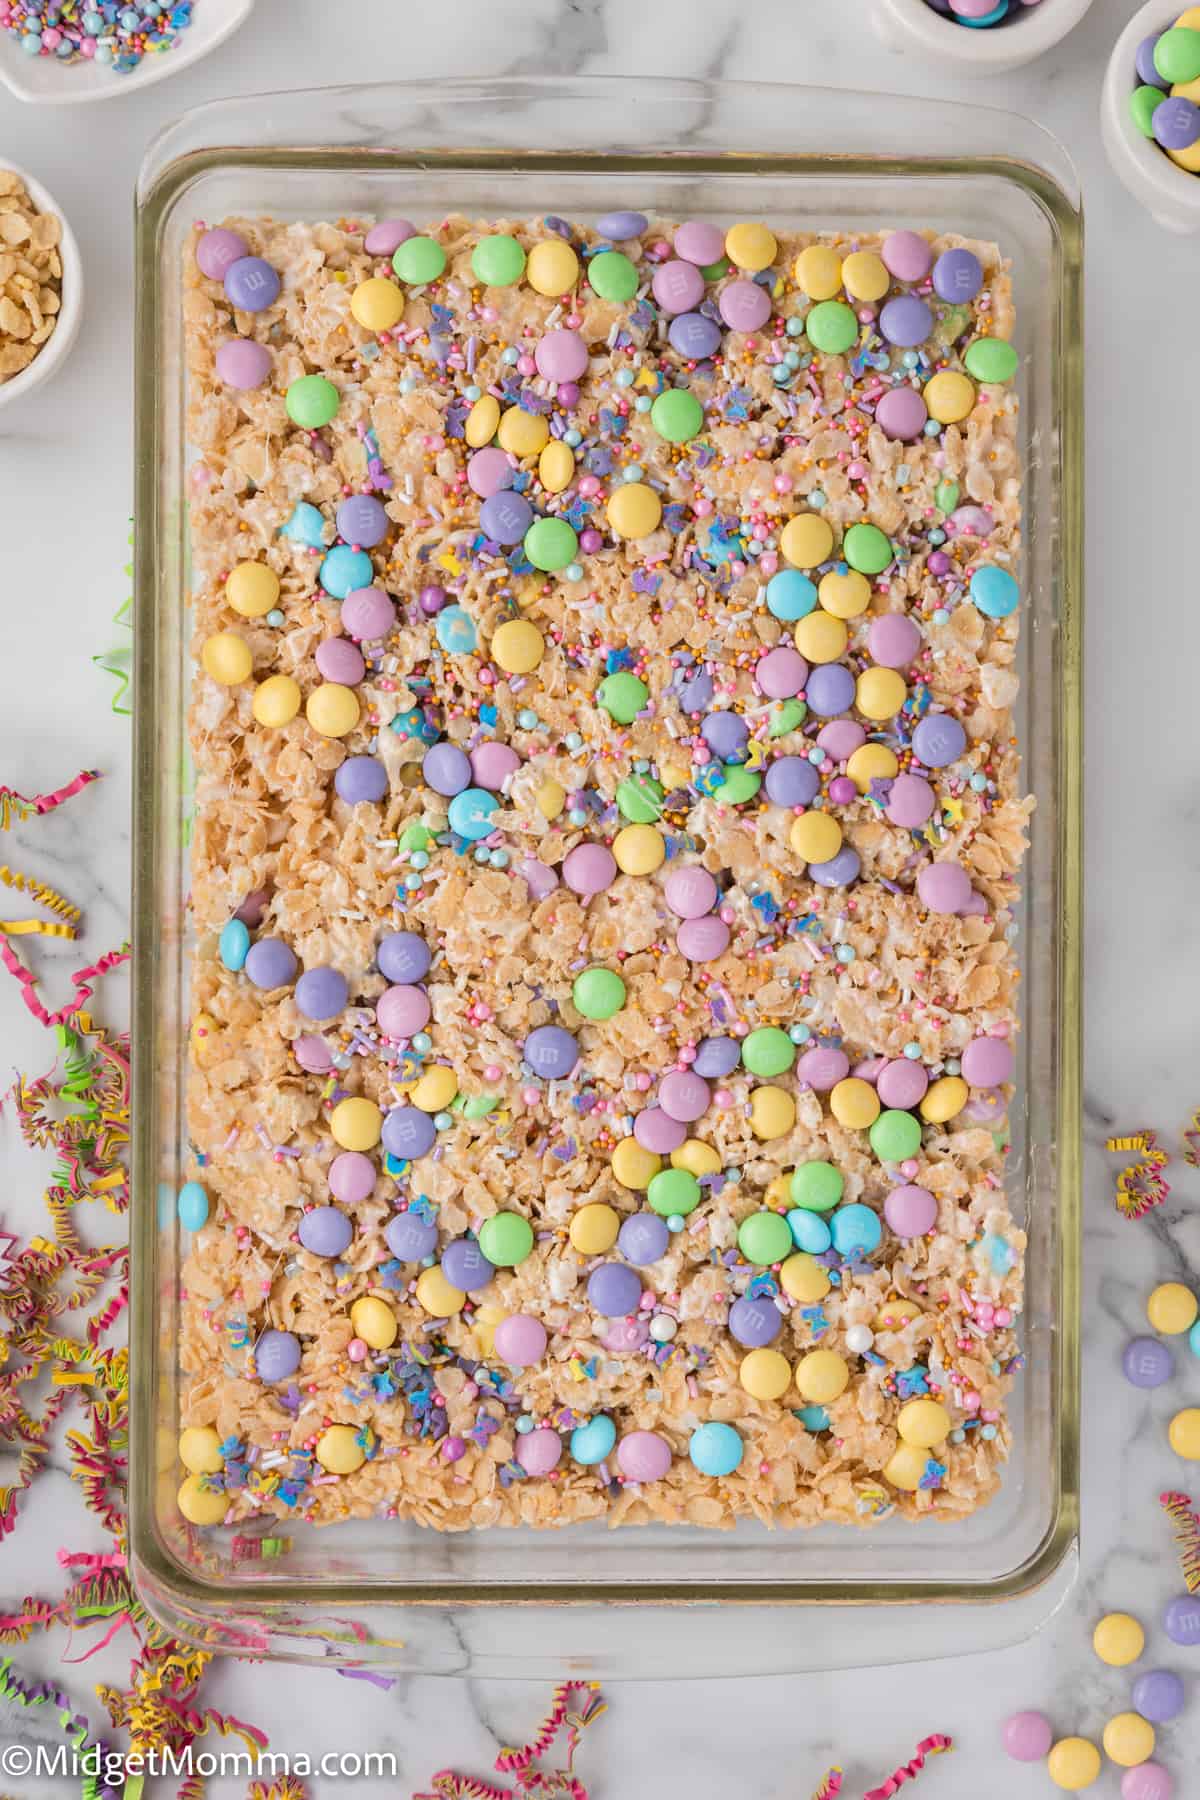 Colorful candy-topped rice cereal treats in a baking tray.